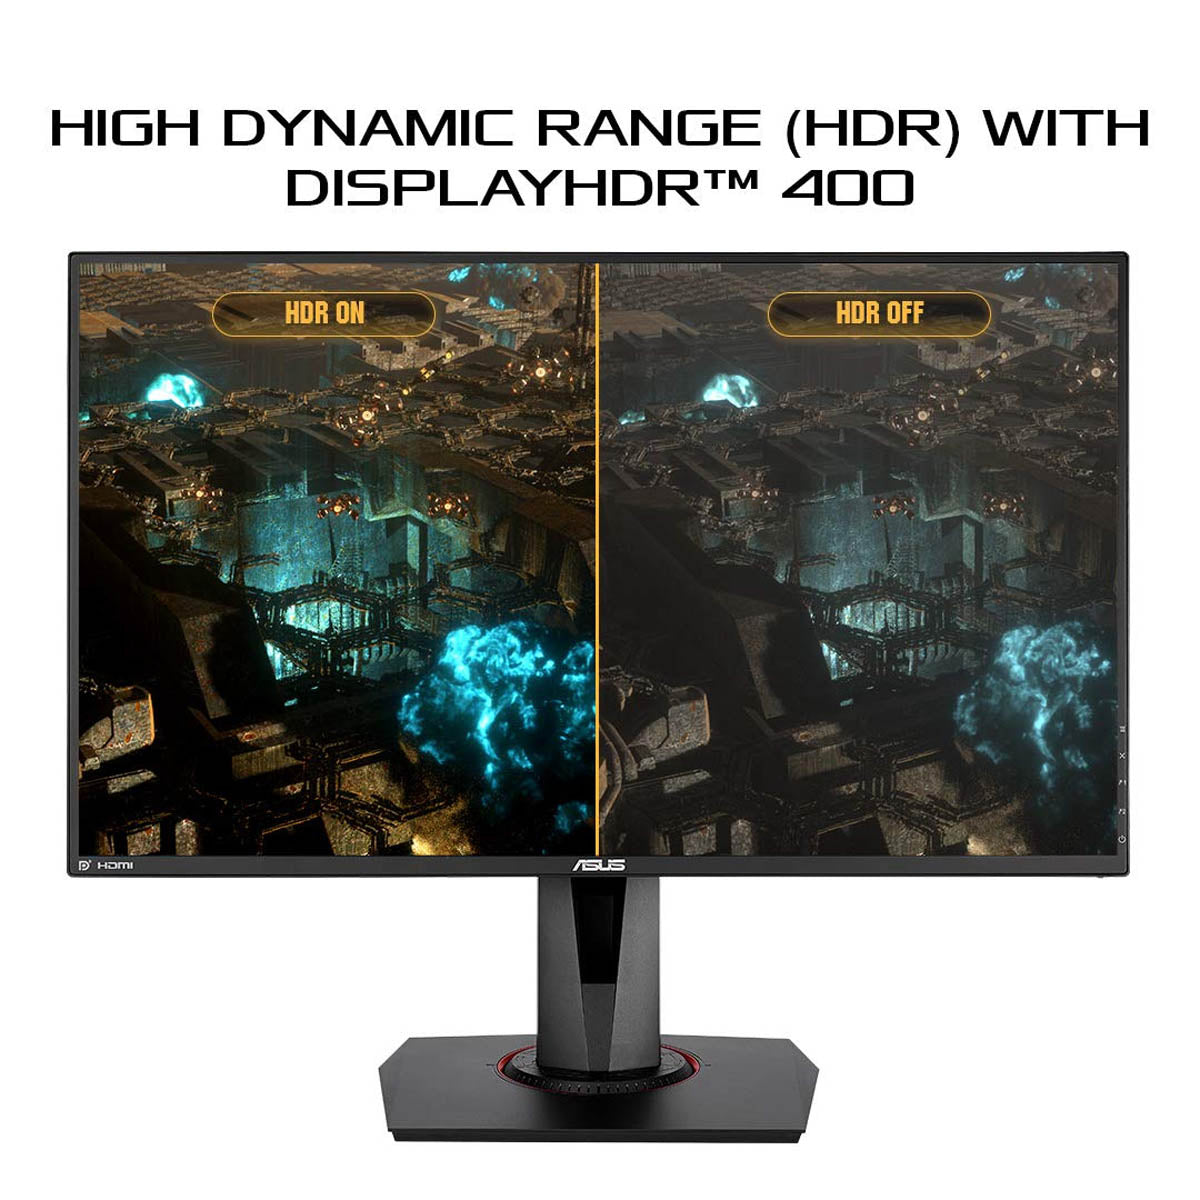 ASUS TUF VG279QM 27 Inch Full HD Gaming Monitor with Nvidia G-SYNC and 2W Dual Stereo Speakers